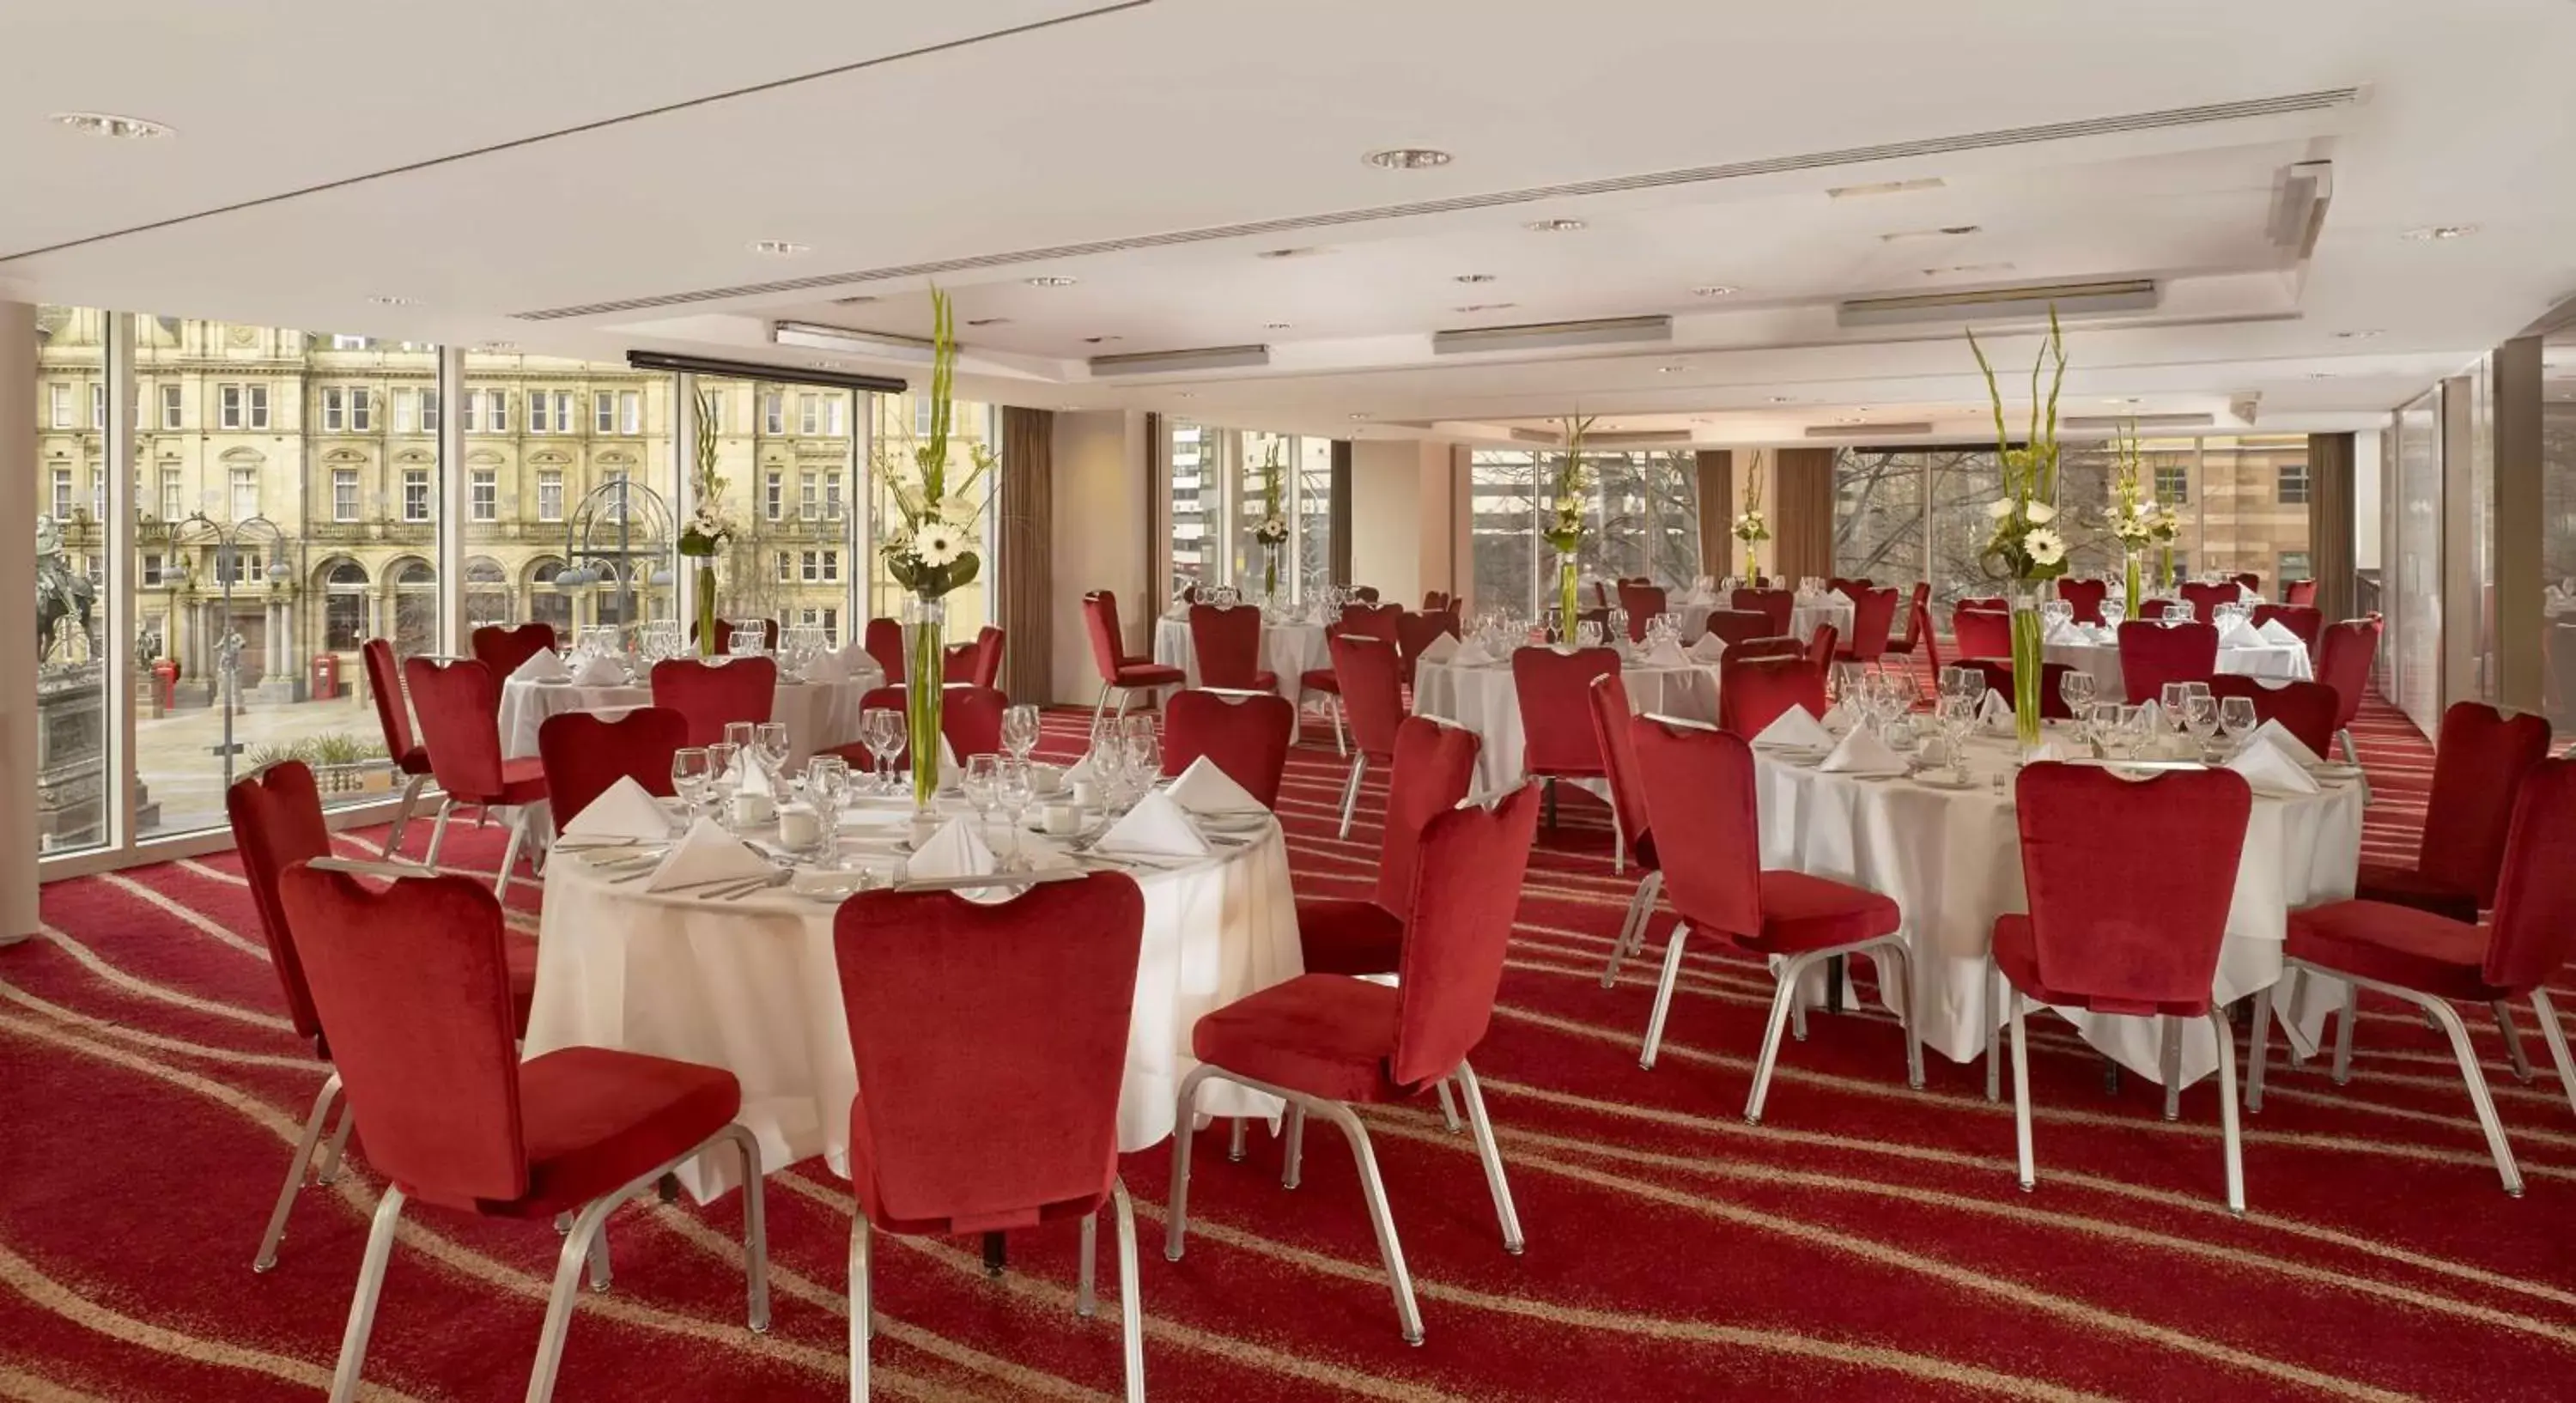 On site, Banquet Facilities in Park Plaza Leeds